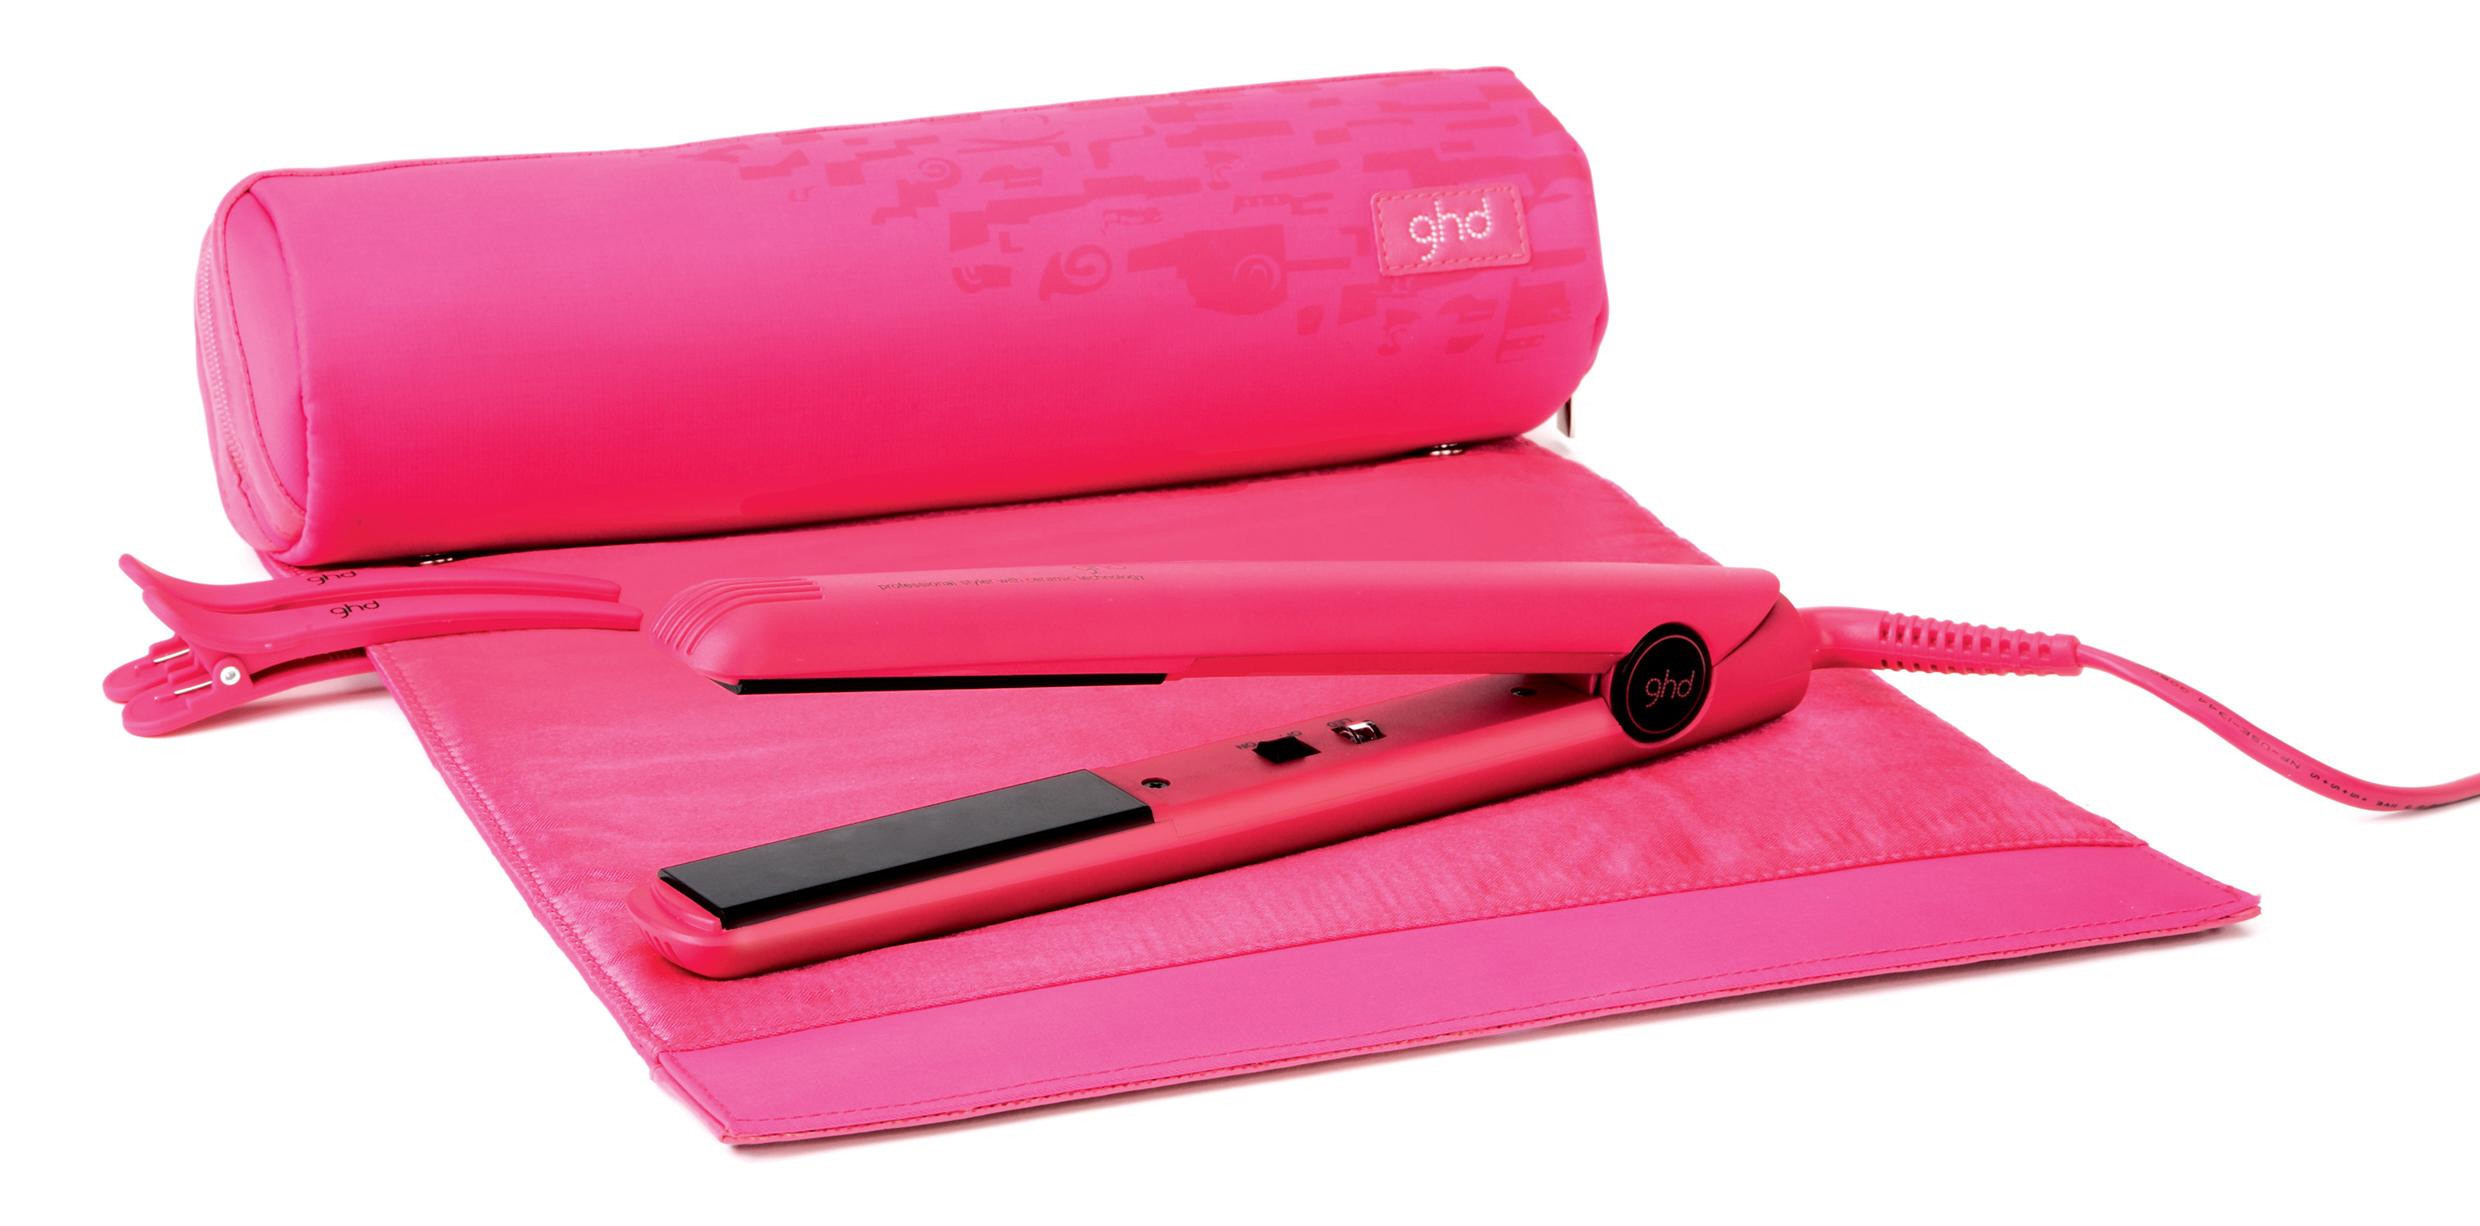 A GHD Straightener from 2007